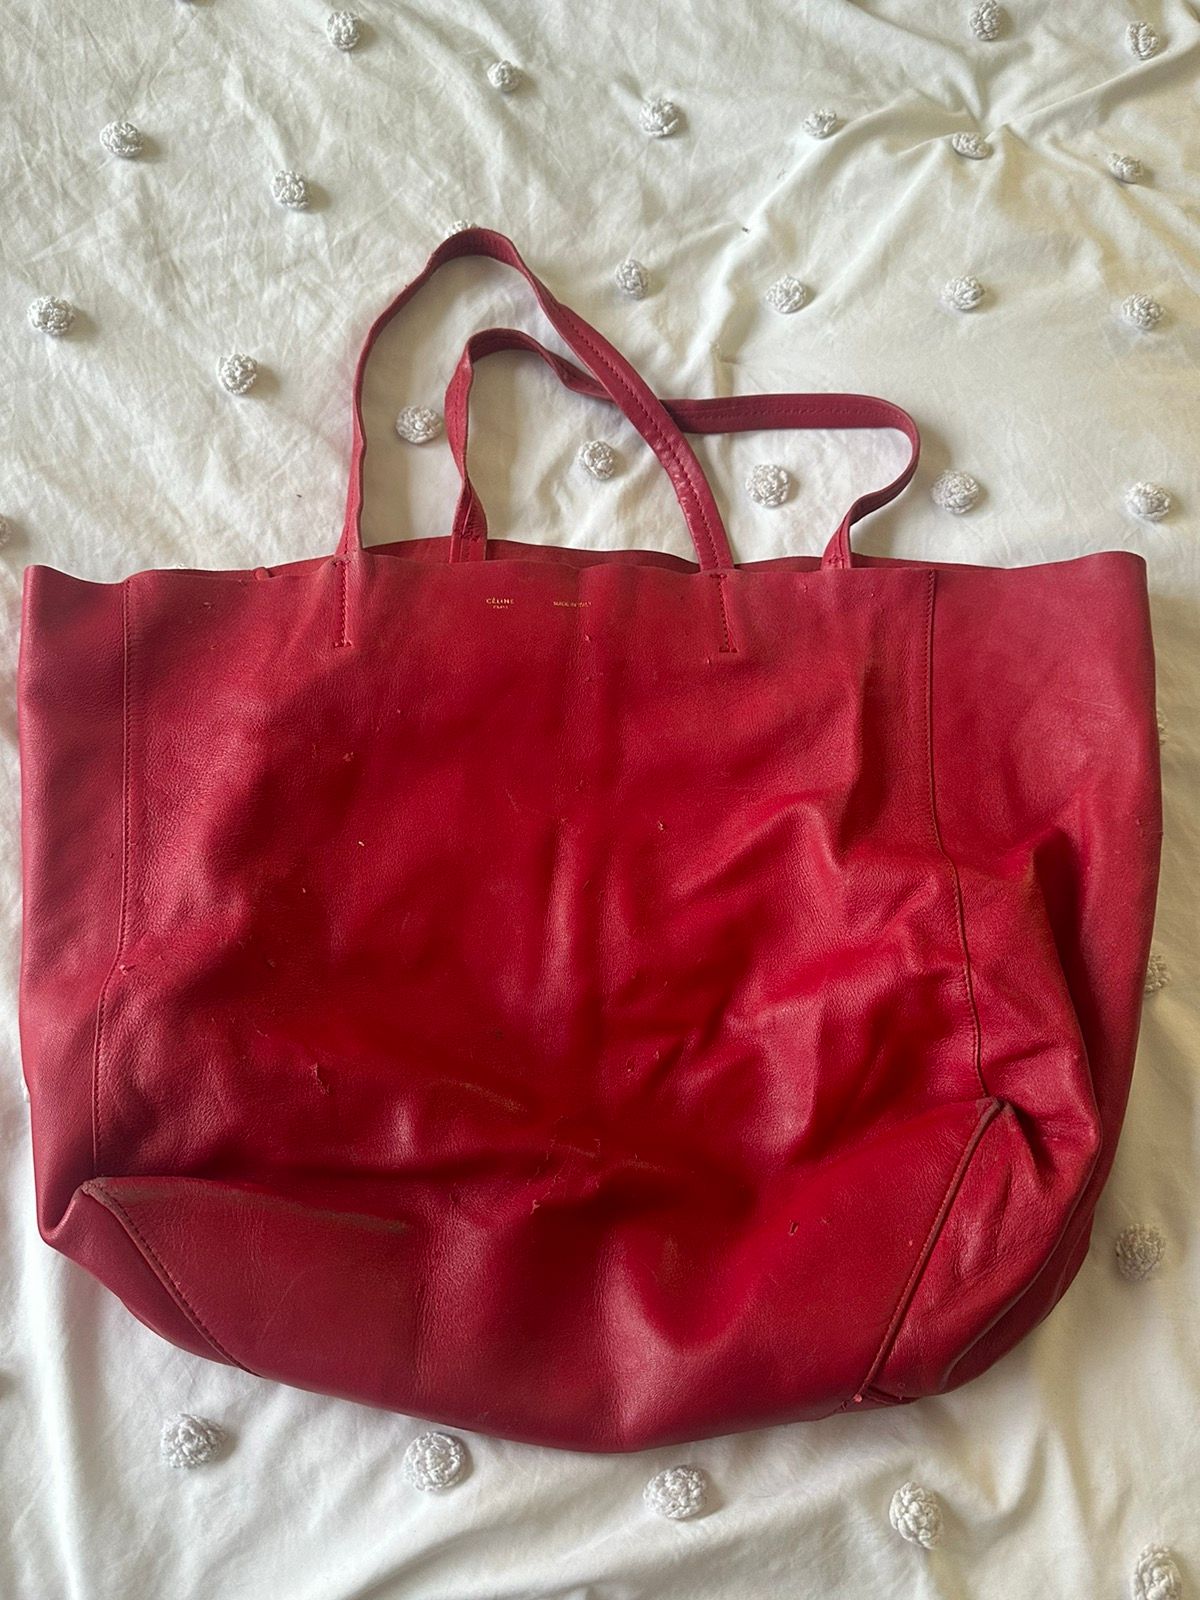 Celine CÉLINE Horizantal Cabas Tote - Genuine Red Leather Size ONE SIZE - 2 Preview